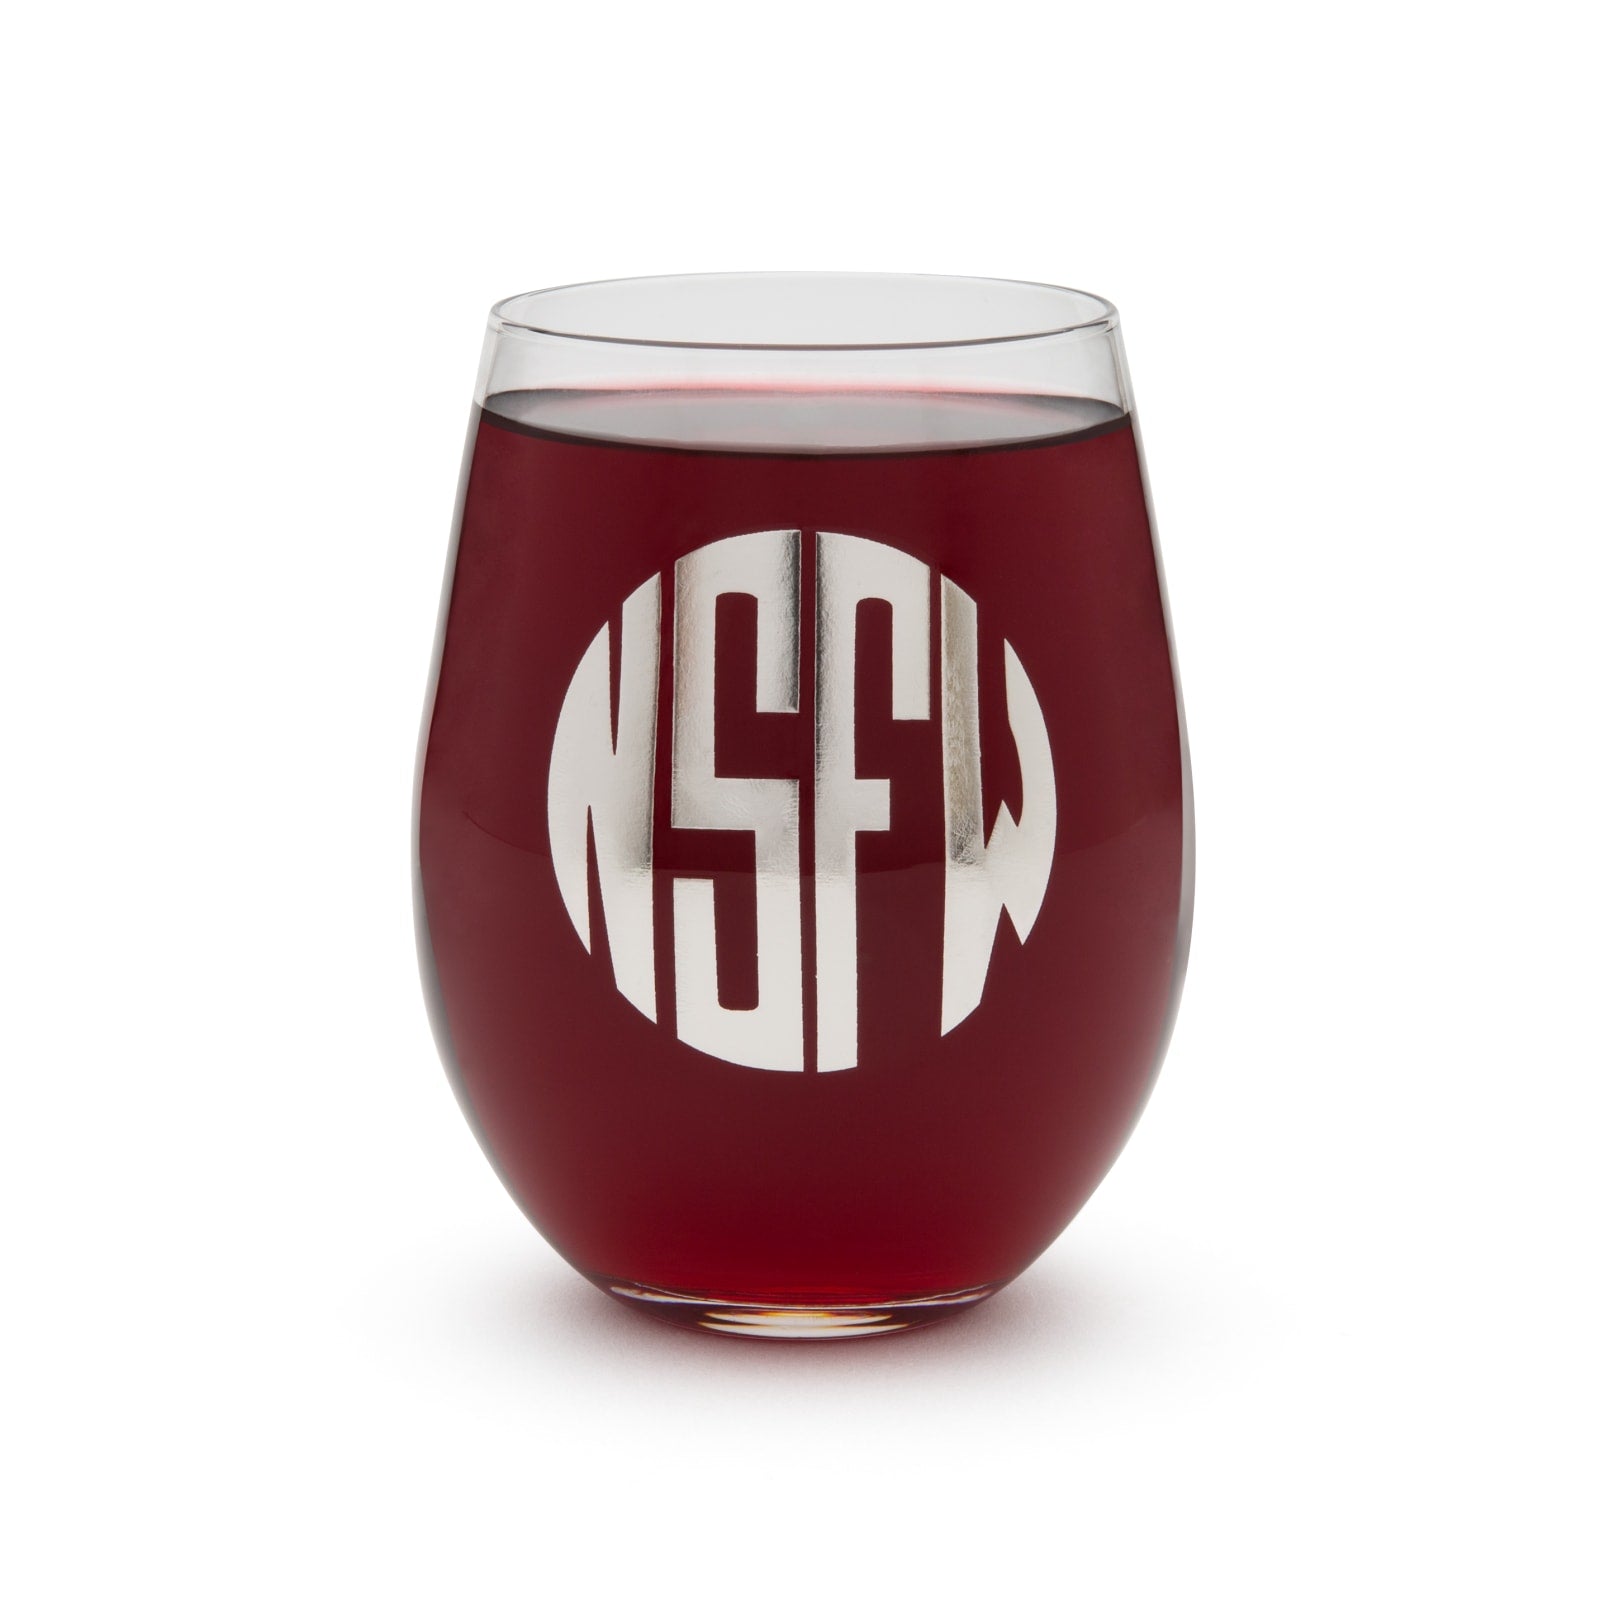 The ultimate acronym wine glass duo